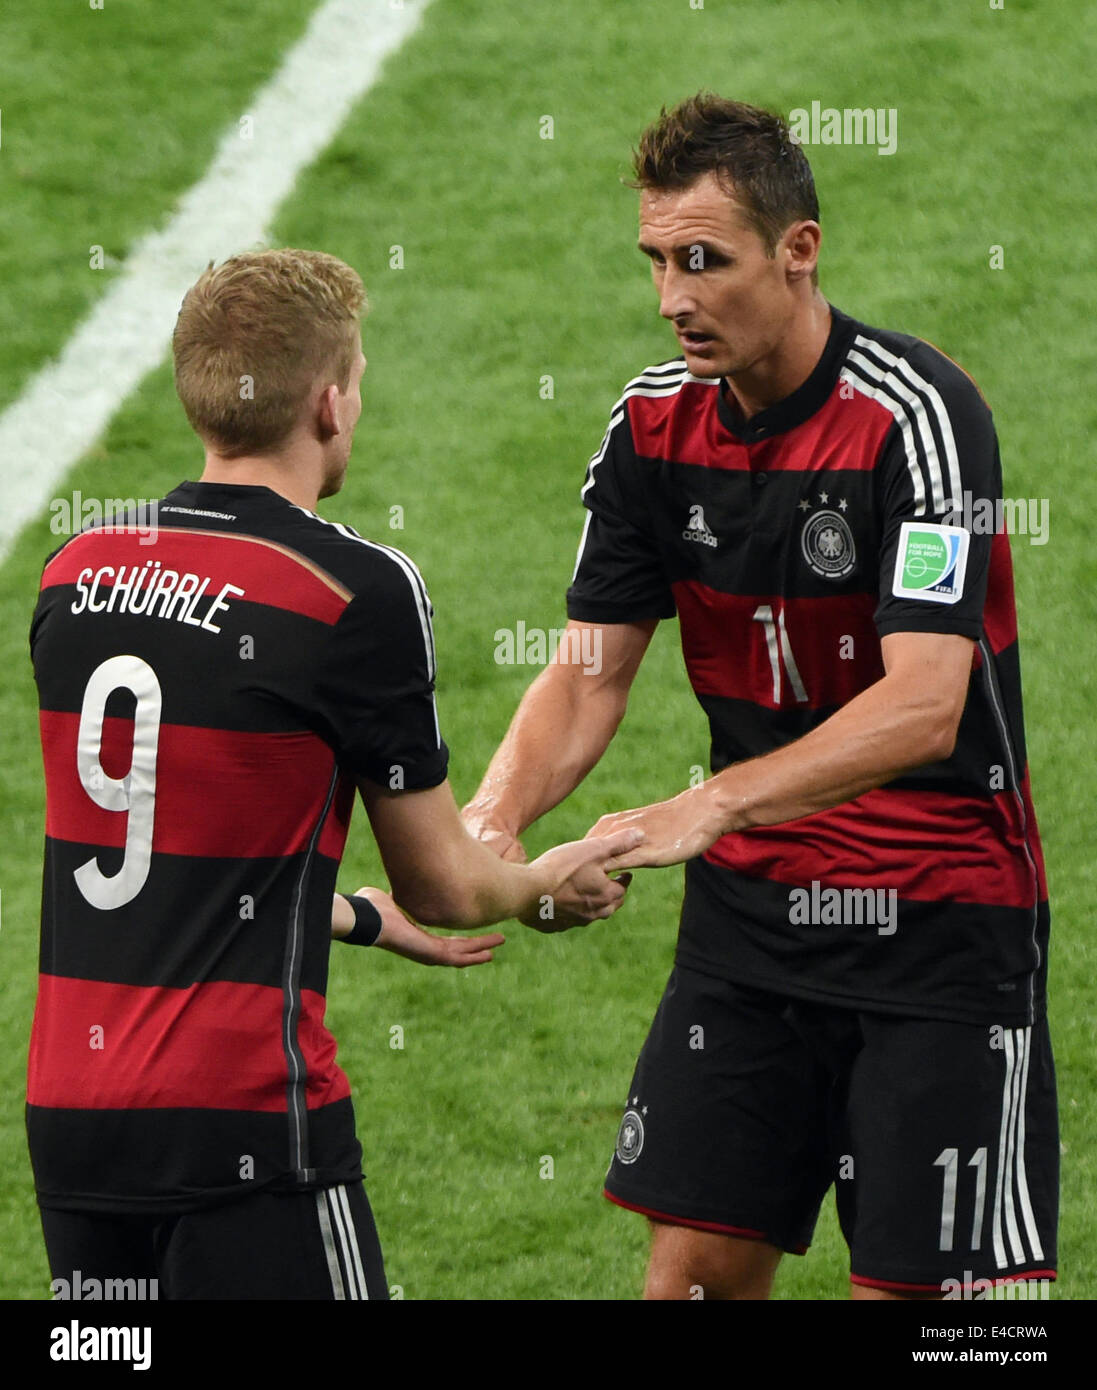 Belo Horizonte, Brazil. 08th July, 2014. Germany's Miroslav Klose (R) is substituted by Andre Schuerrle during the FIFA World Cup 2014 semi-final soccer match between Brazil and Germany at Estadio Mineirao in Belo Horizonte, Brazil, 08 July 2014. Photo: Andreas Gebert/dpa/Alamy Live News Stock Photo